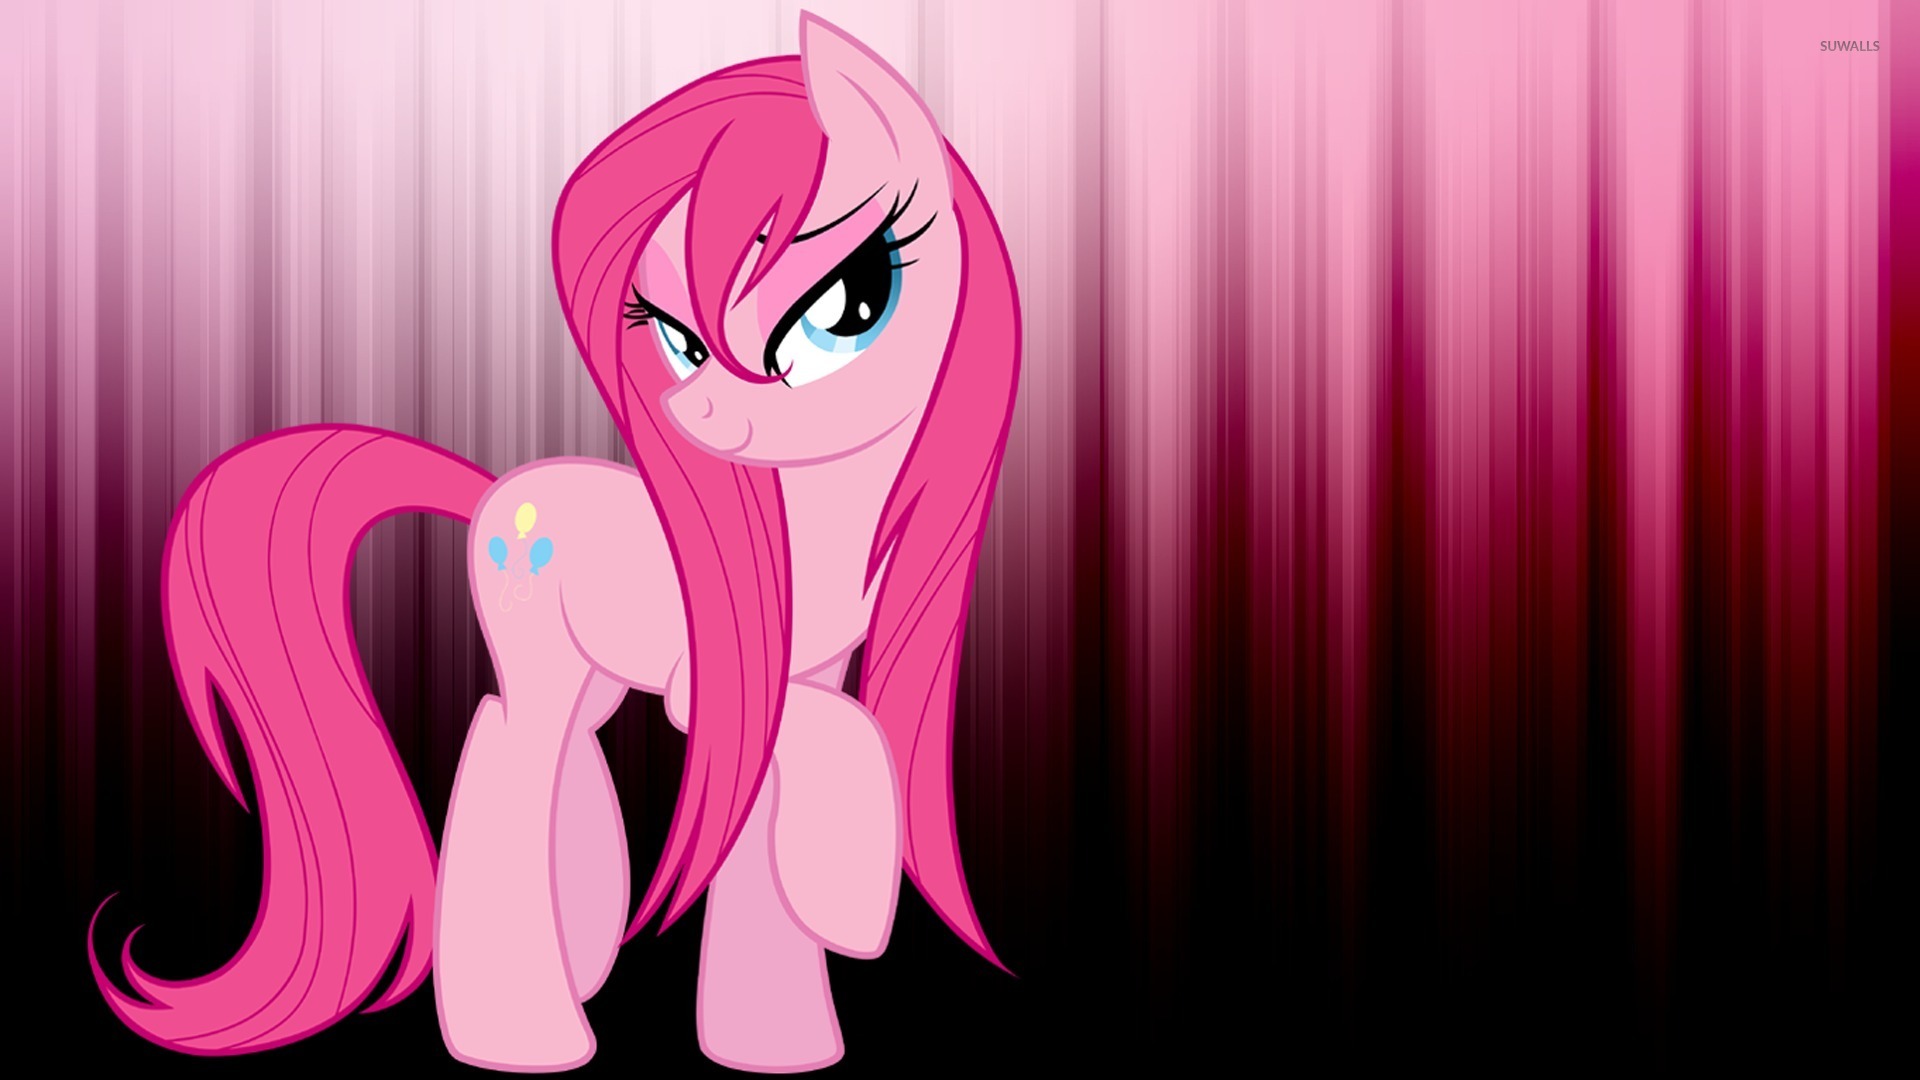 Sensual Pinkie Pie from My Little Pony wallpaper - Cartoon wallpapers ...